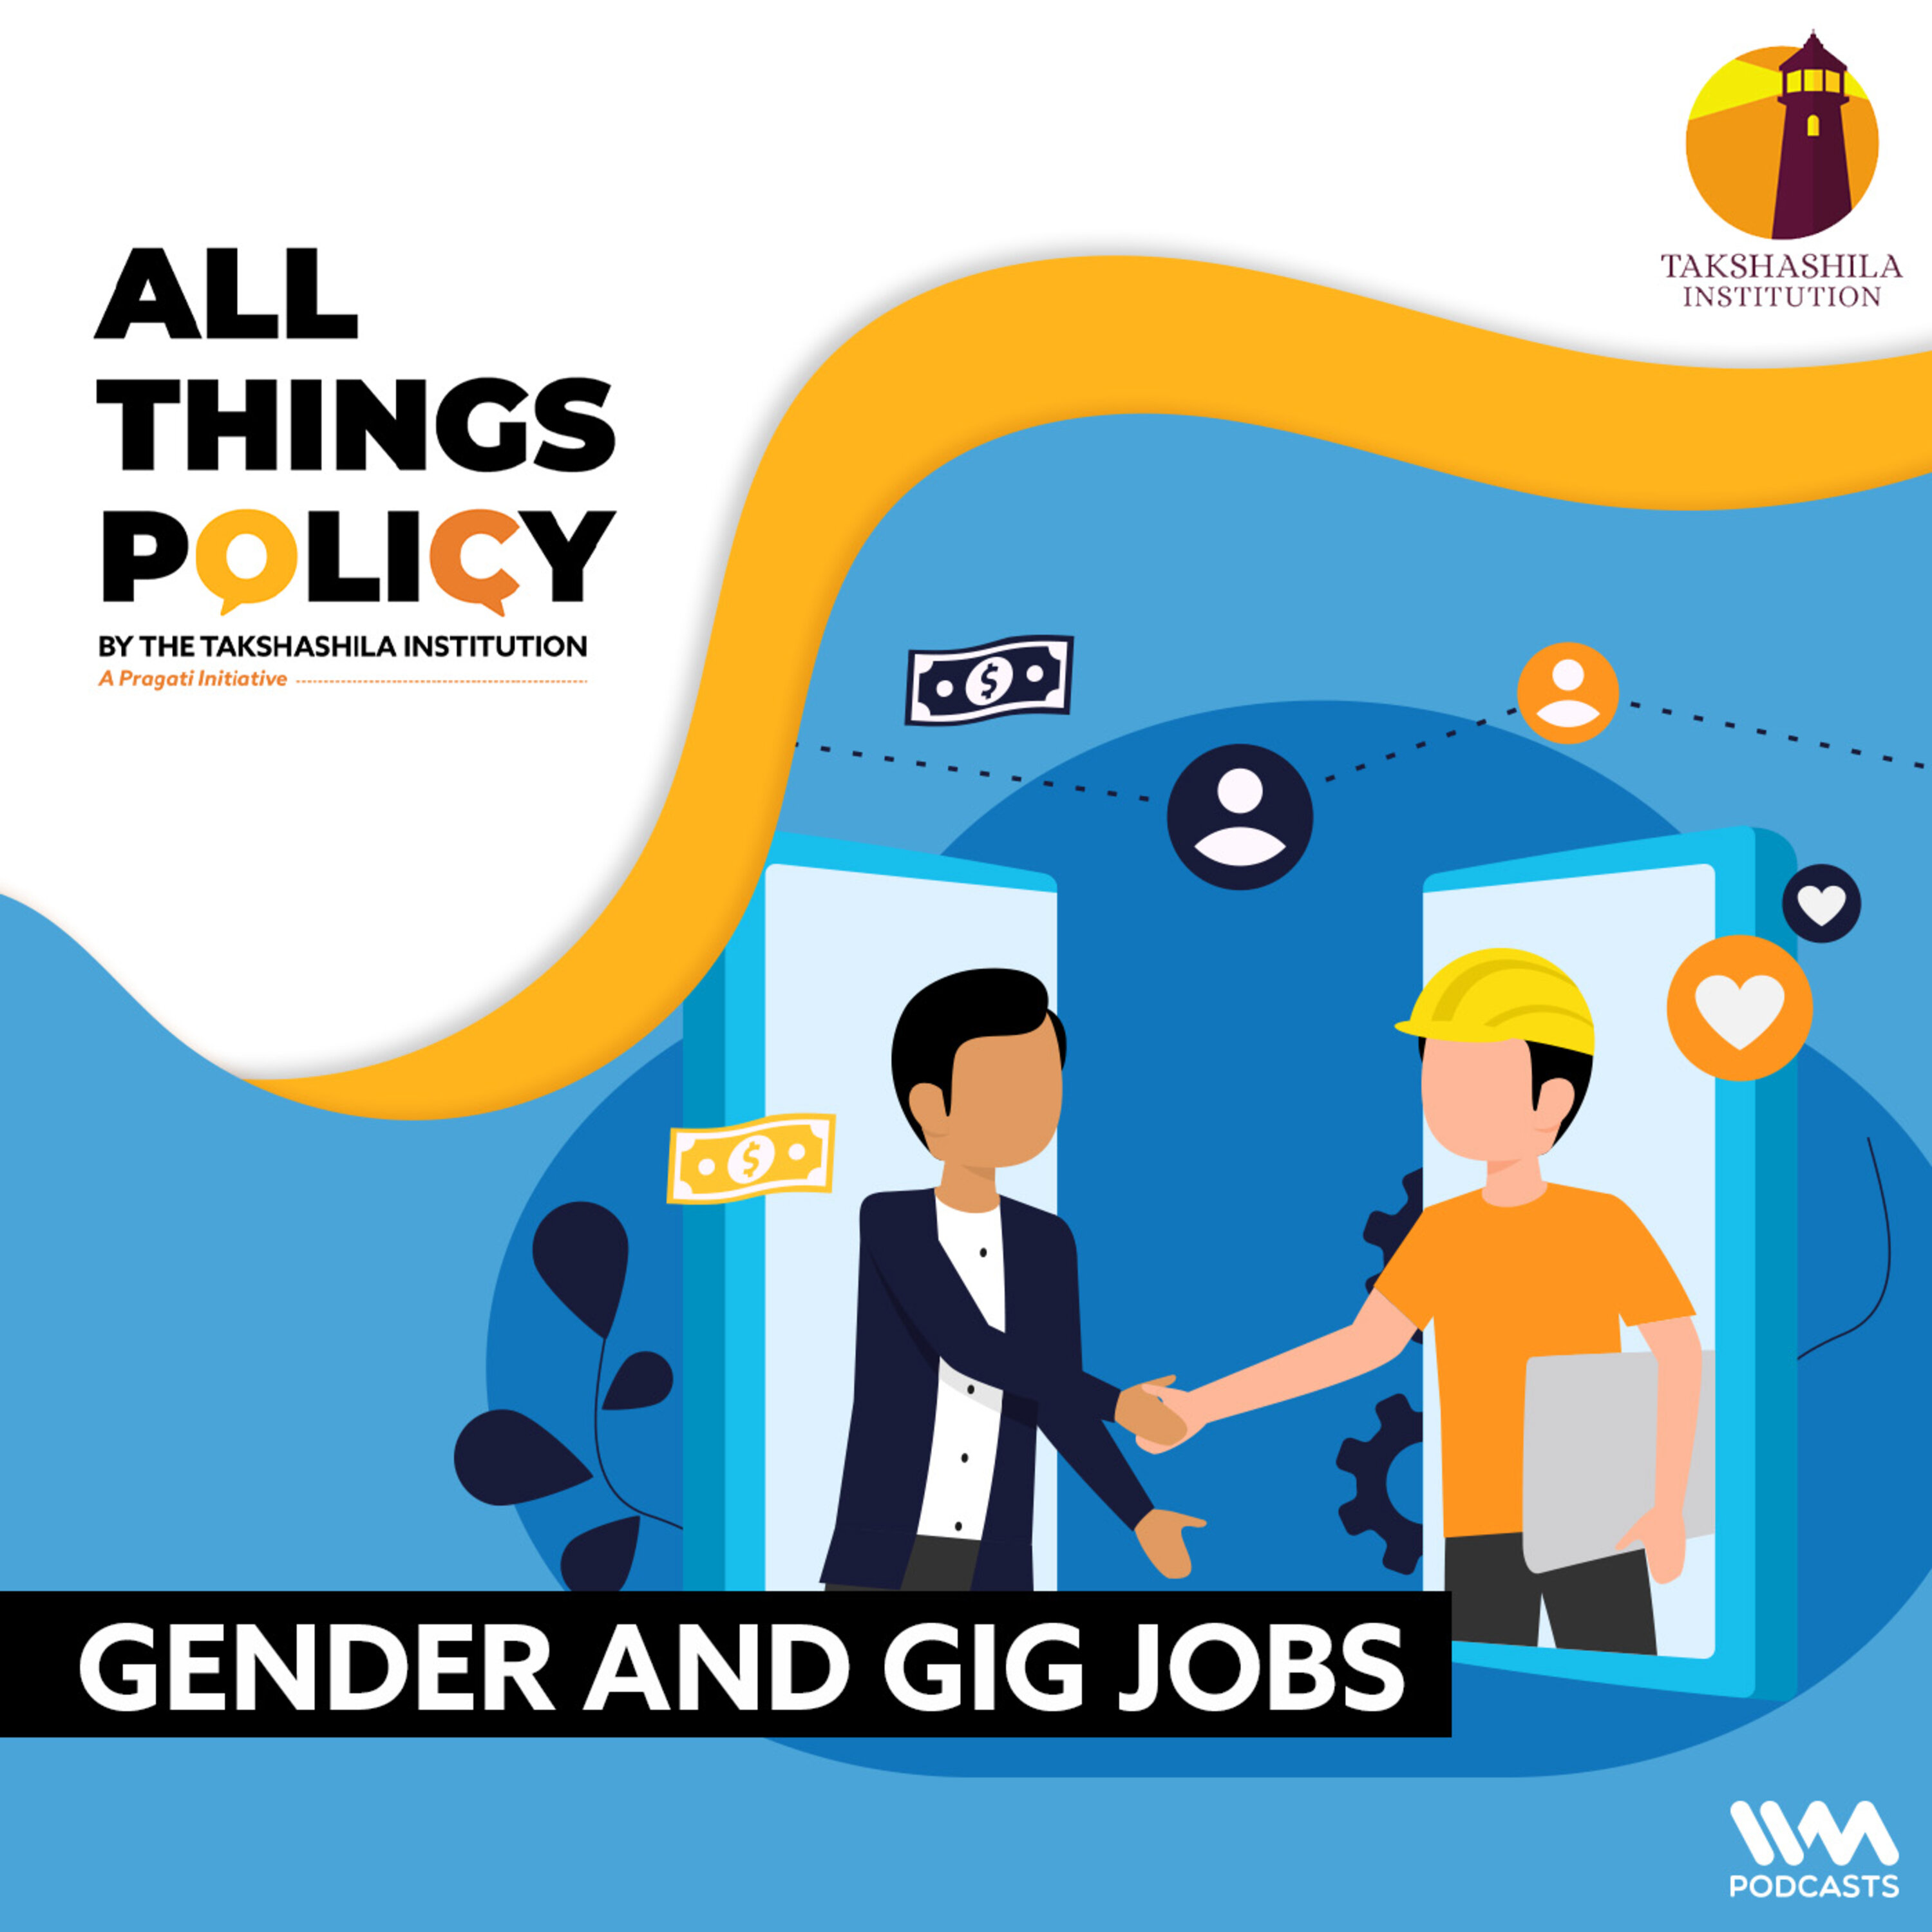 Gender and Gig Jobs